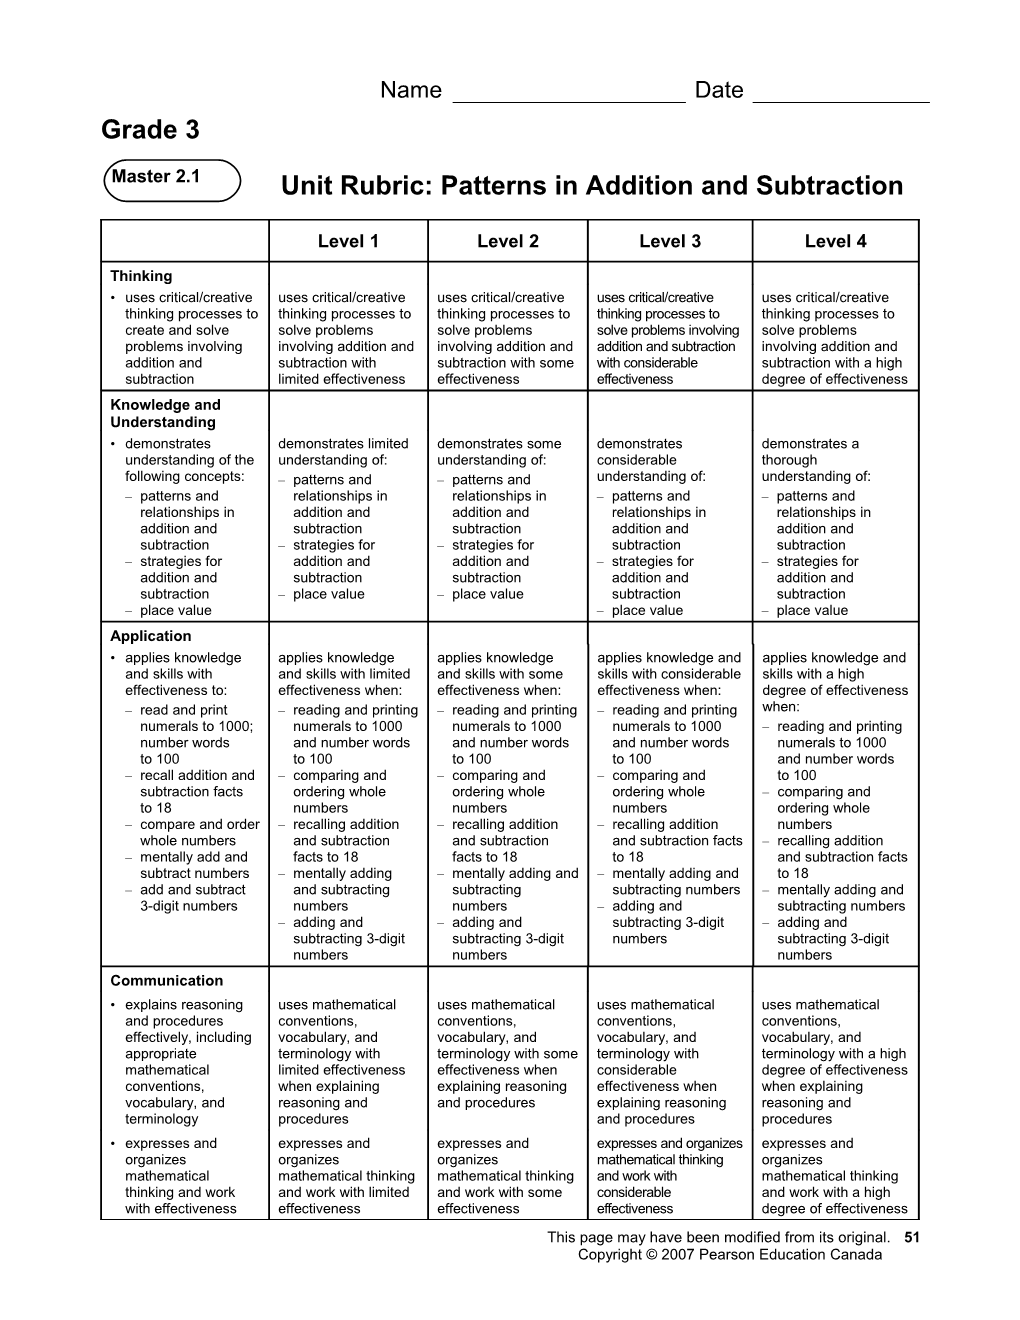 Unit Rubric: Patterns in Addition and Subtraction